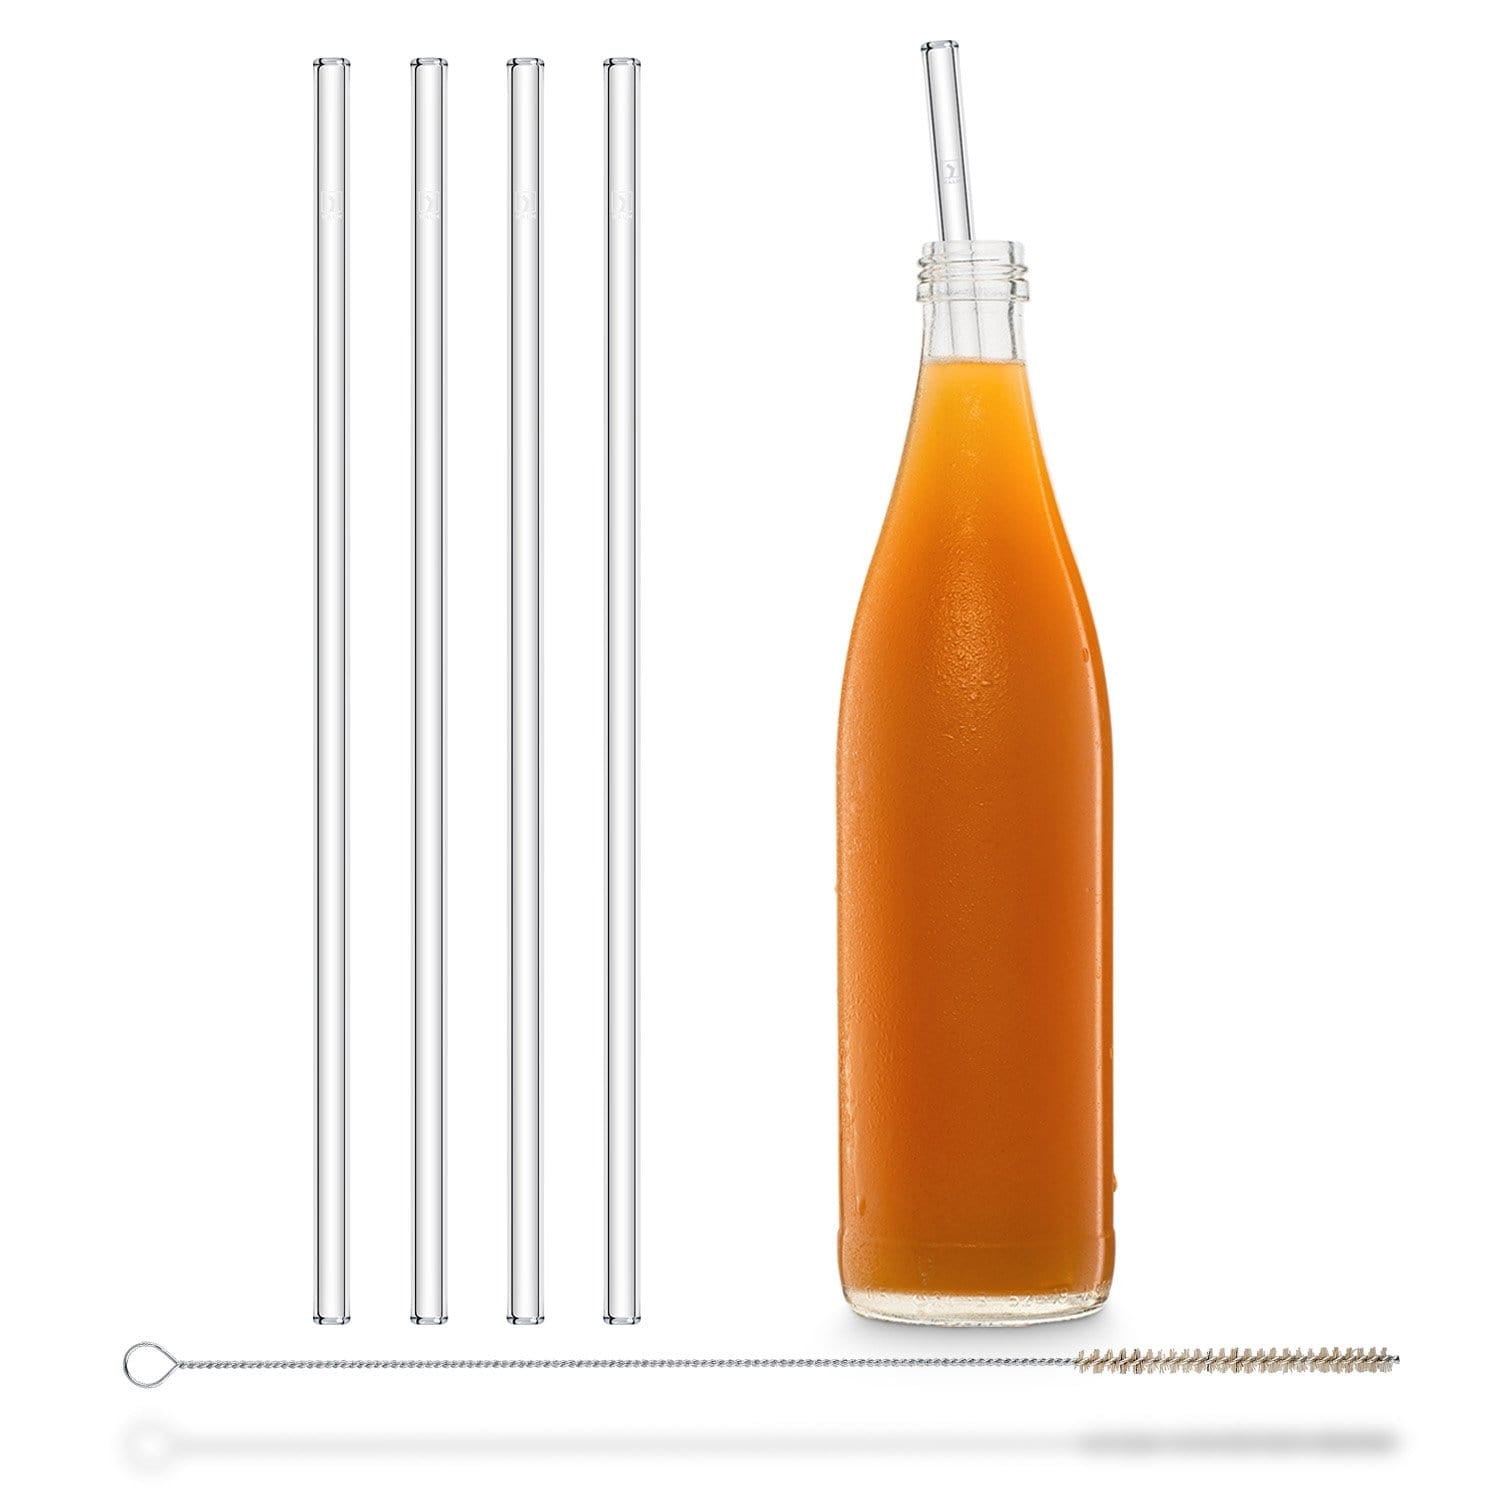 Halm Reusable Glass Straws 4 inch with Plastic Free Brush - Set of 6